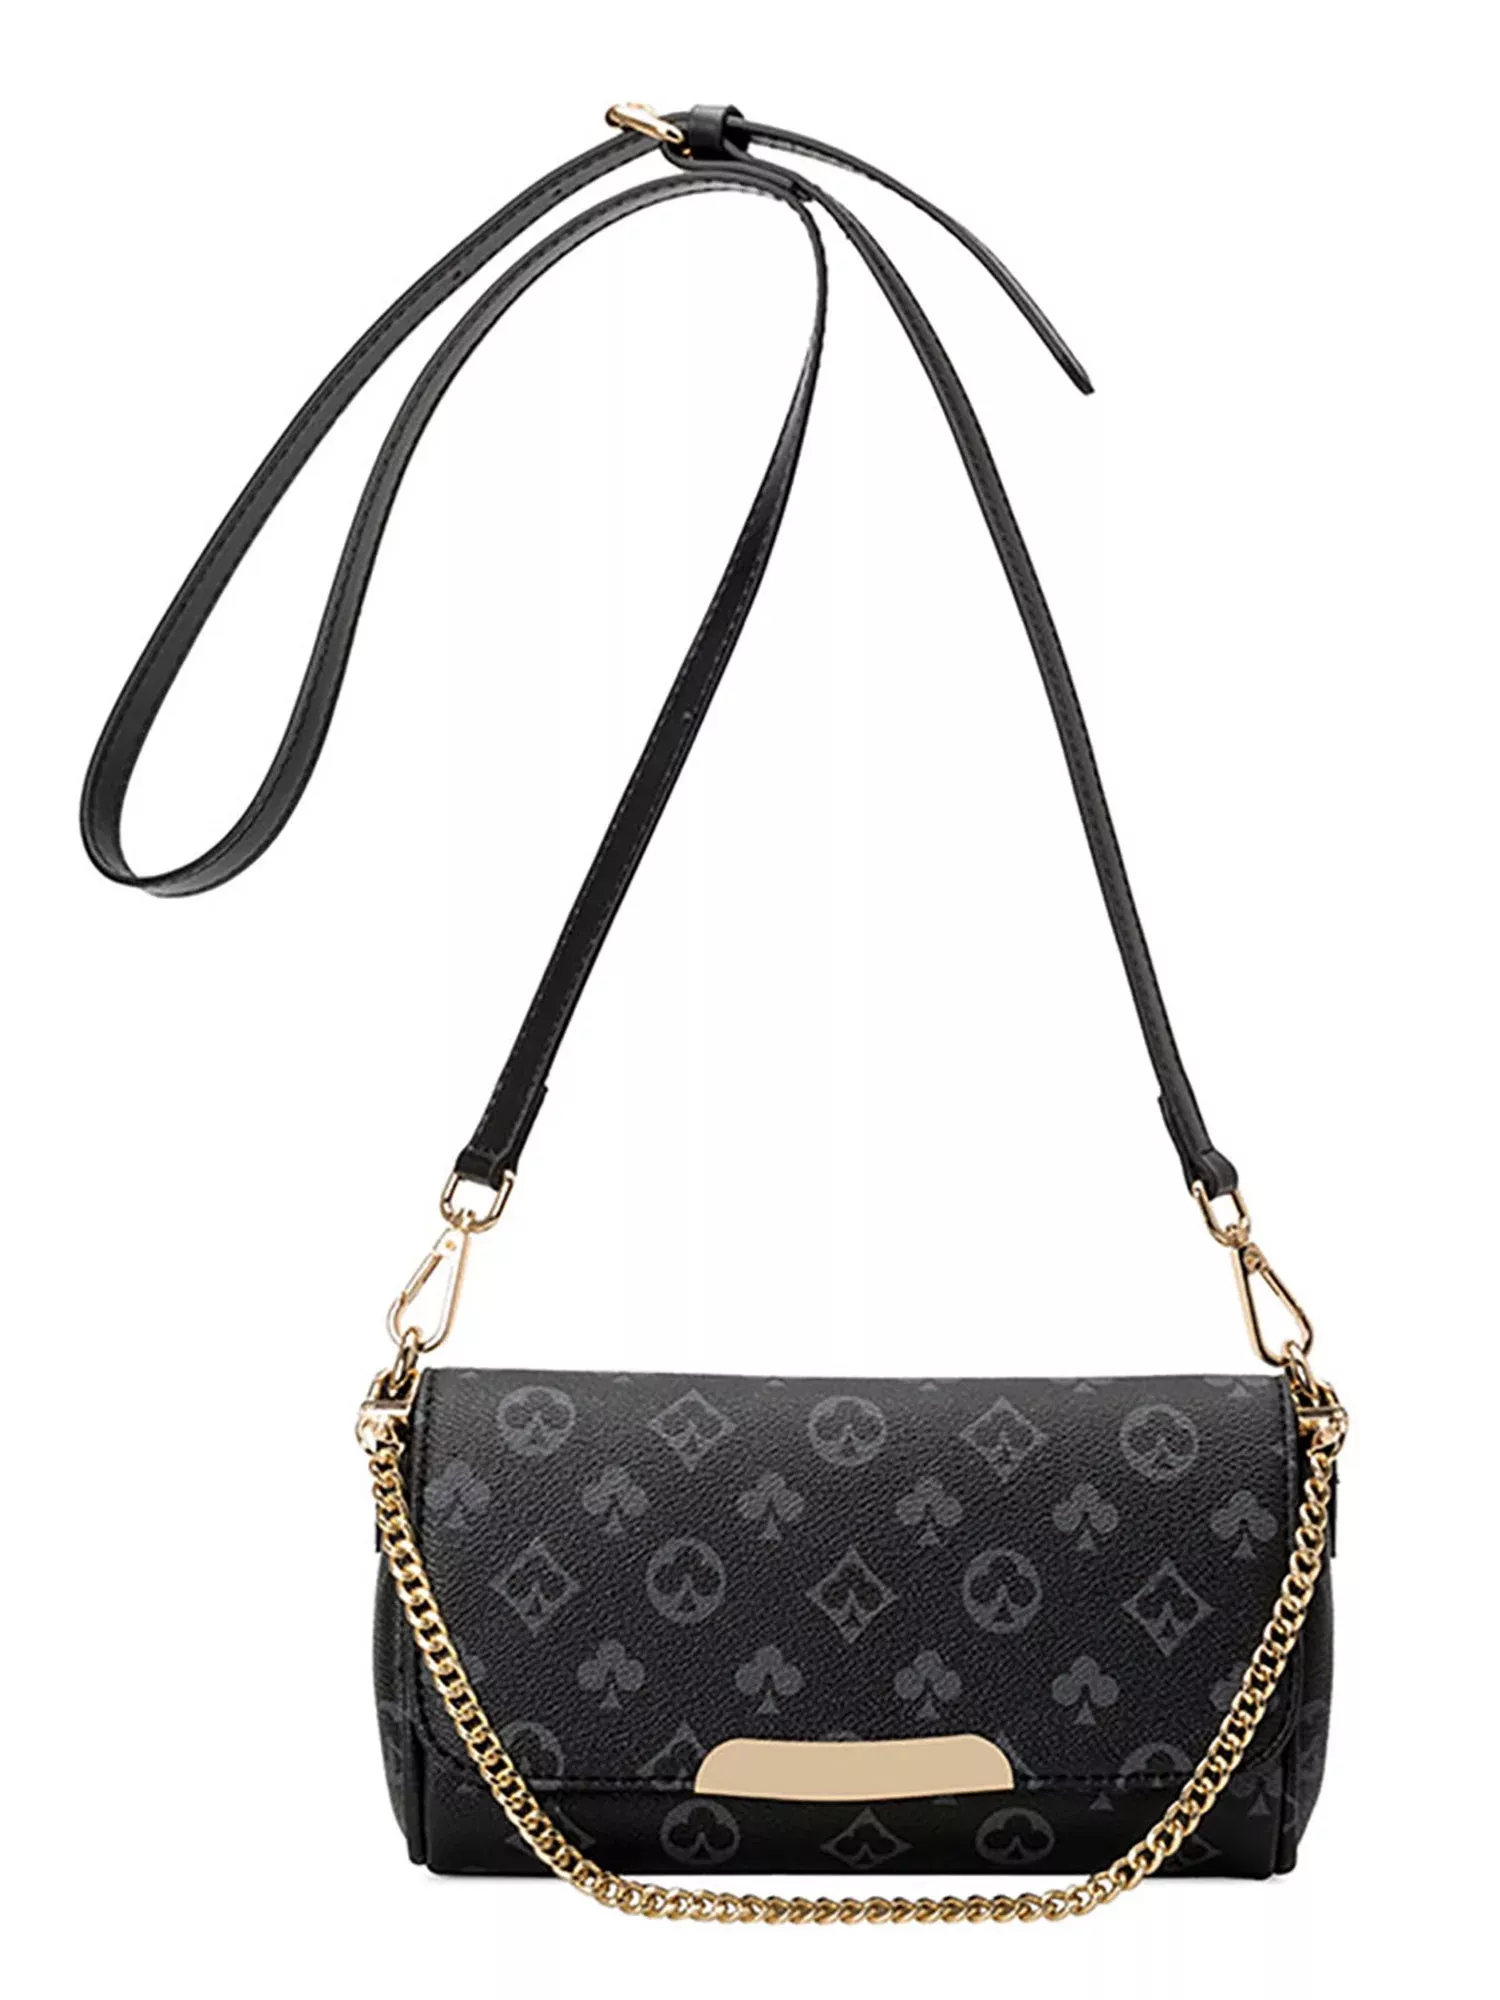 Sexy Dance Black Checkered Tote Shoulder Bag With Inner Pouch